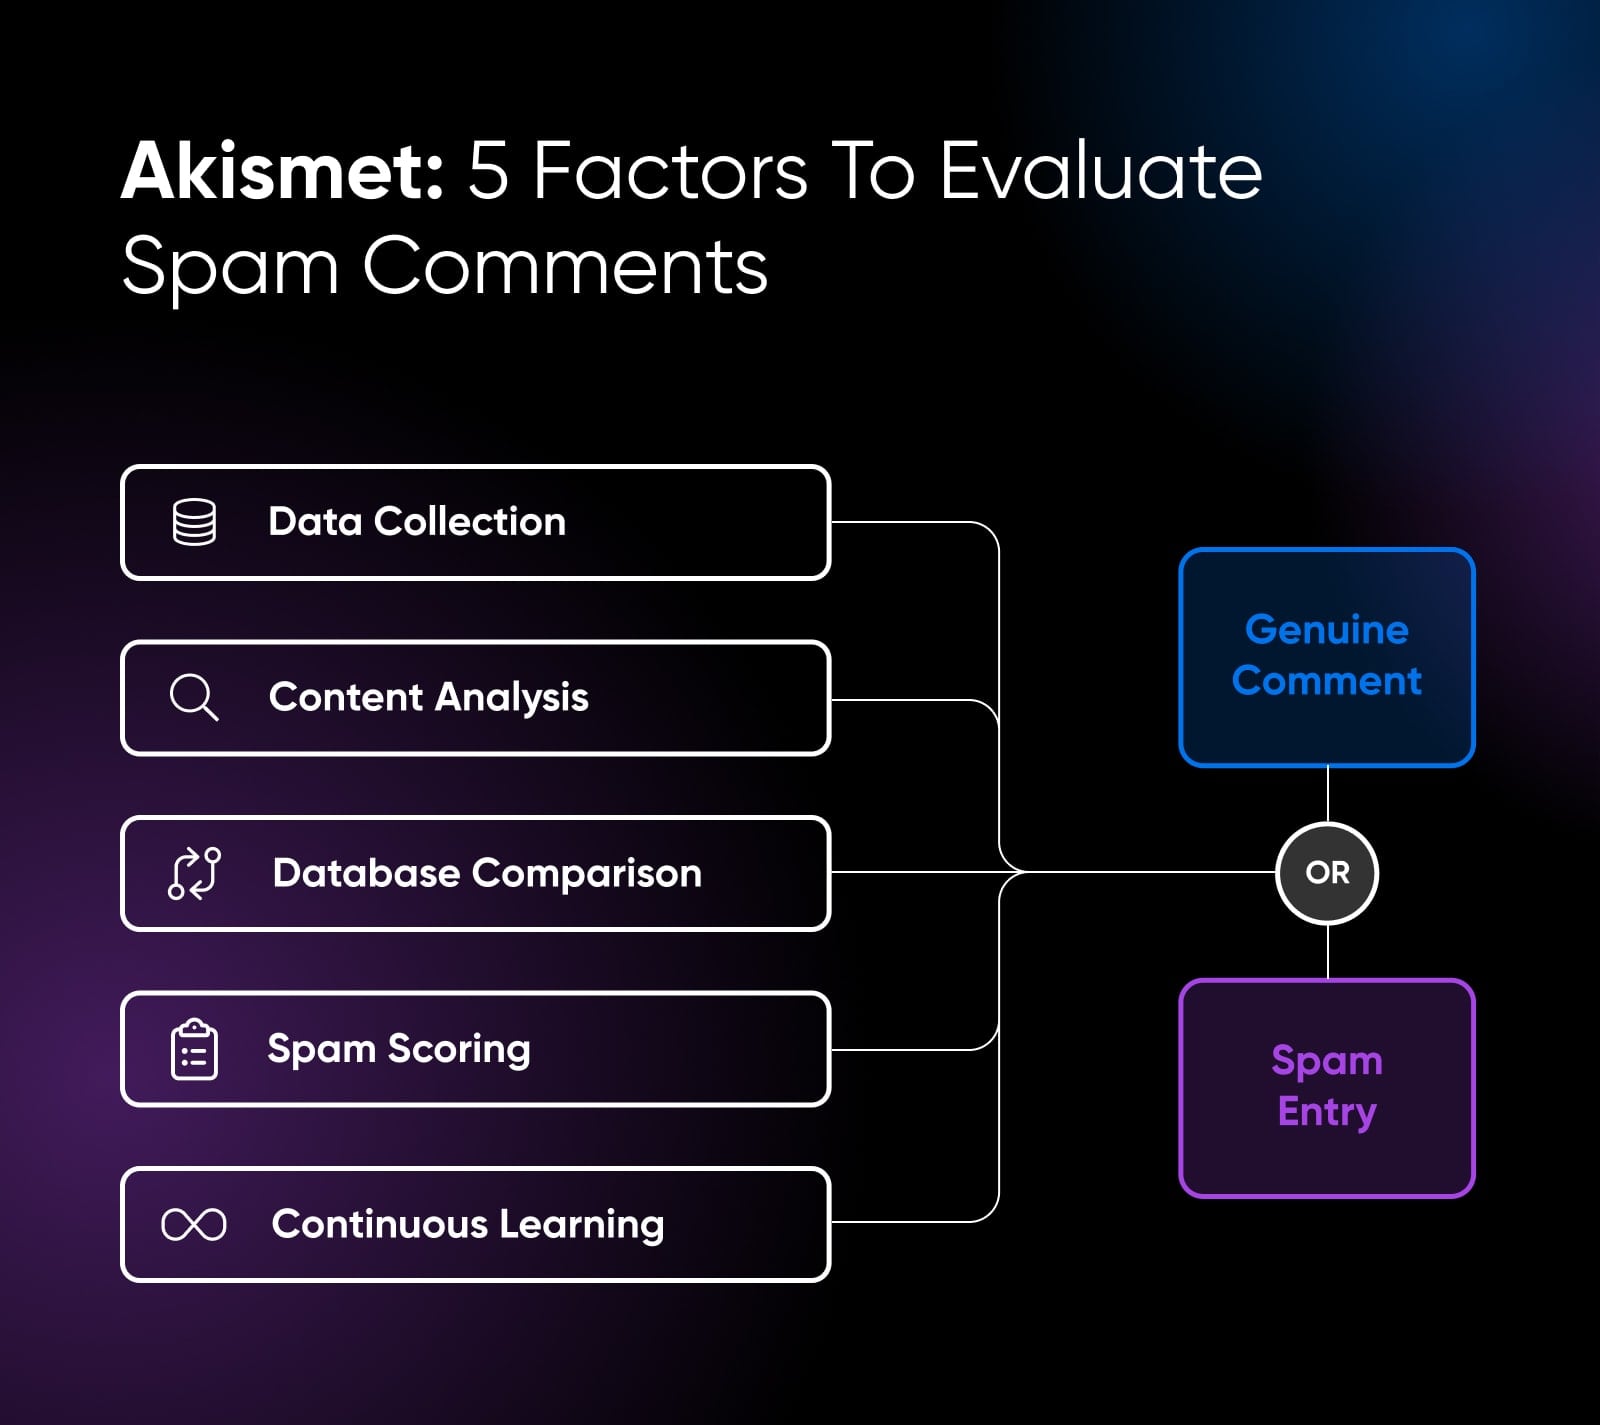 "Akismet: 5 Factors To Evaluate Spam Comments" bubble map bifurcated into a genuine comment and spam entry.